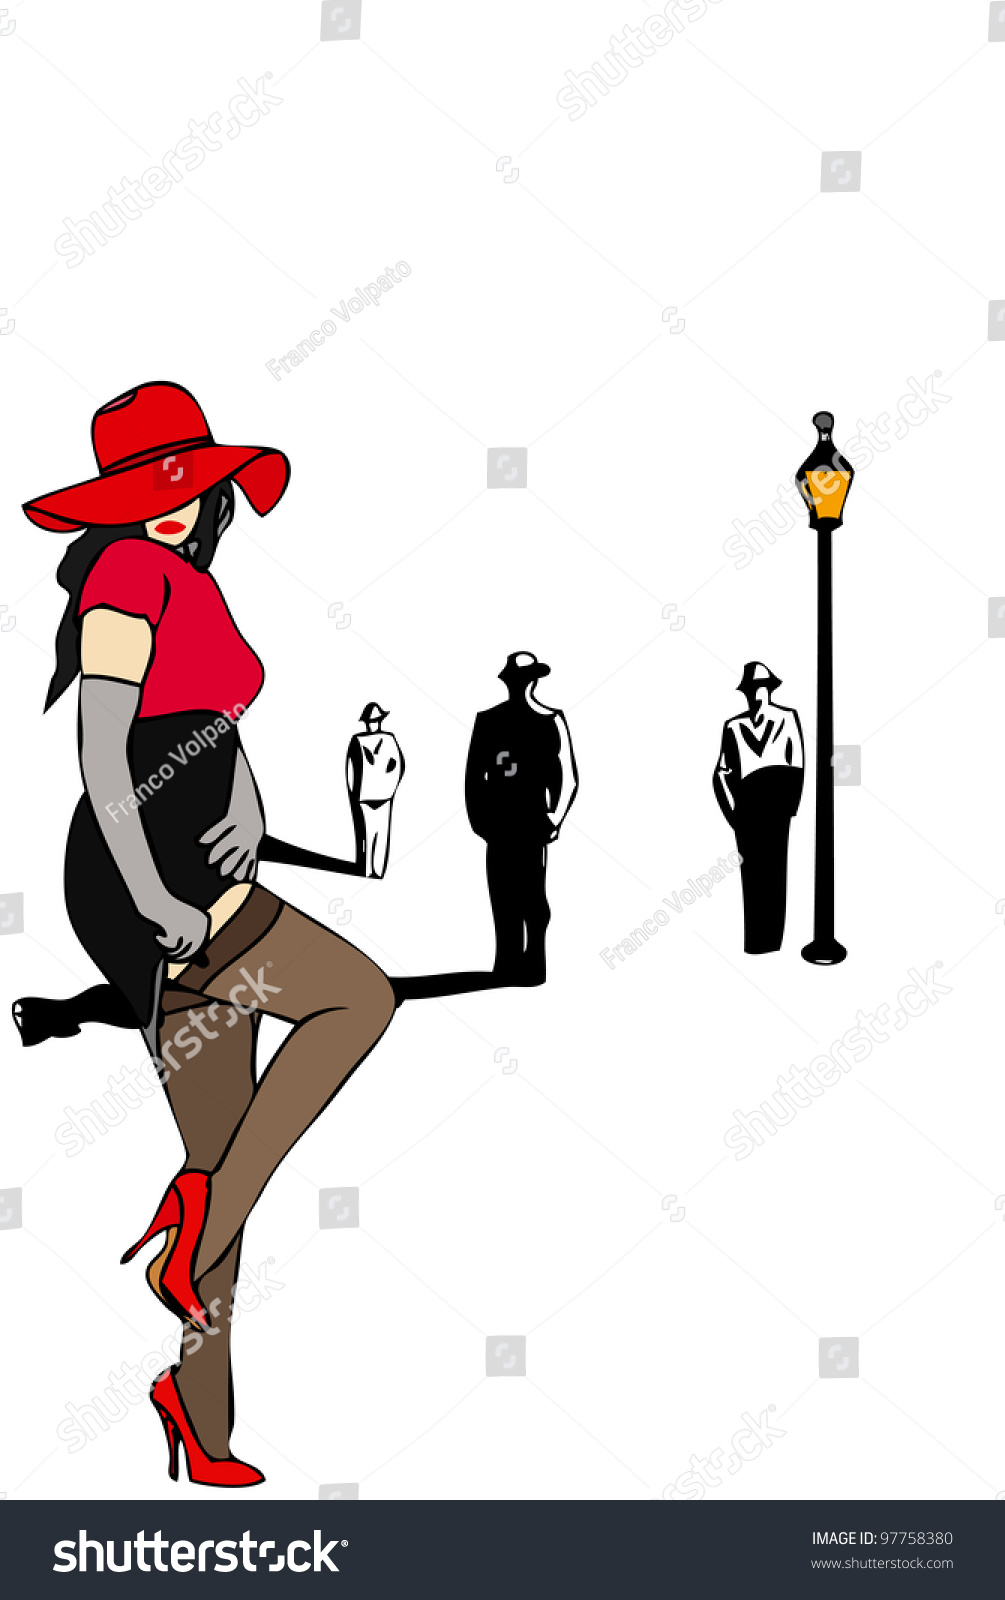 Prostitution 5 A Woman Is A Prostitute On The Street Stock Vector Illustration 97758380